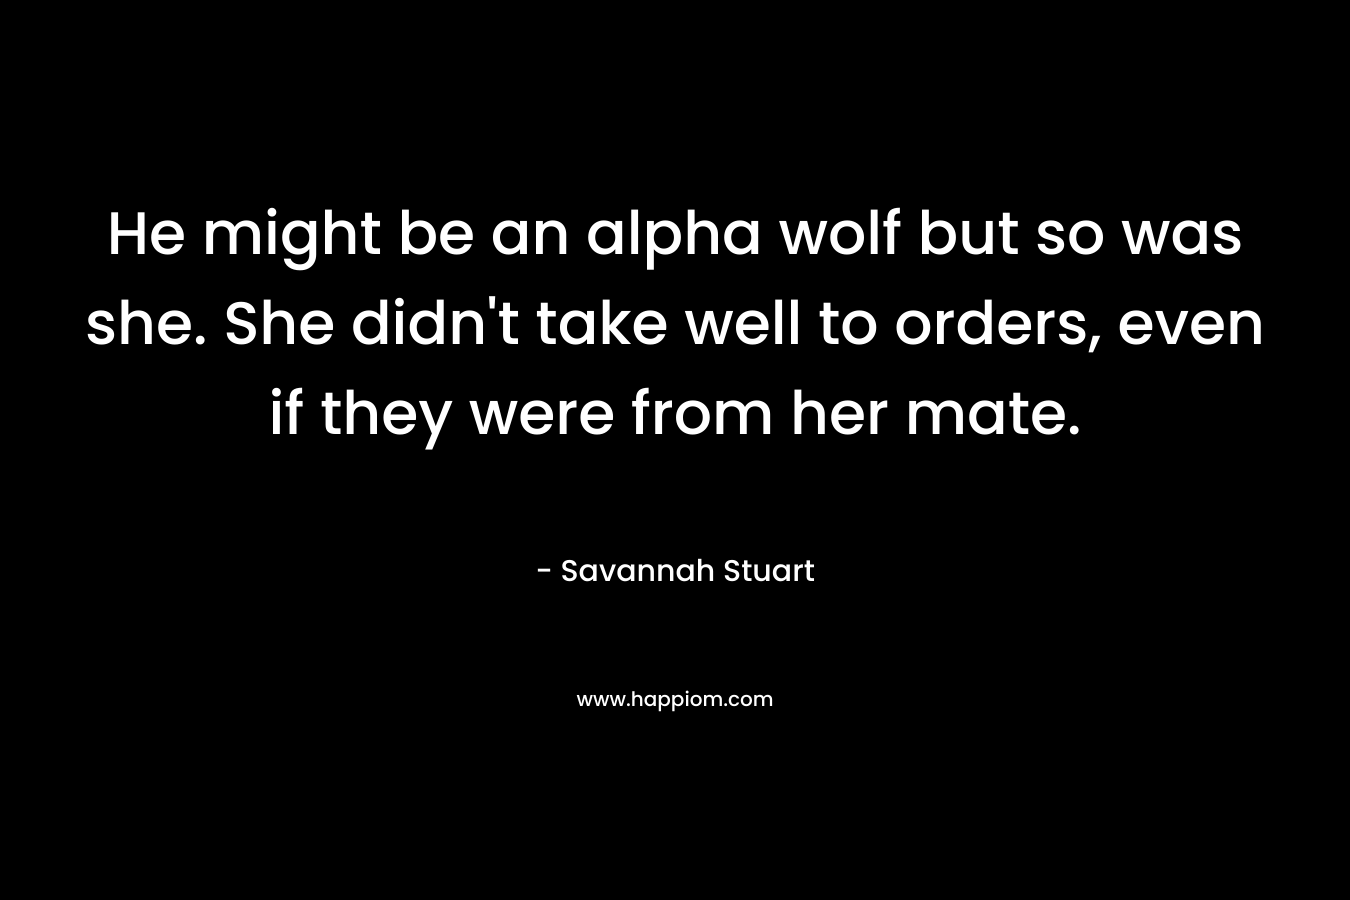 He might be an alpha wolf but so was she. She didn’t take well to orders, even if they were from her mate. – Savannah Stuart